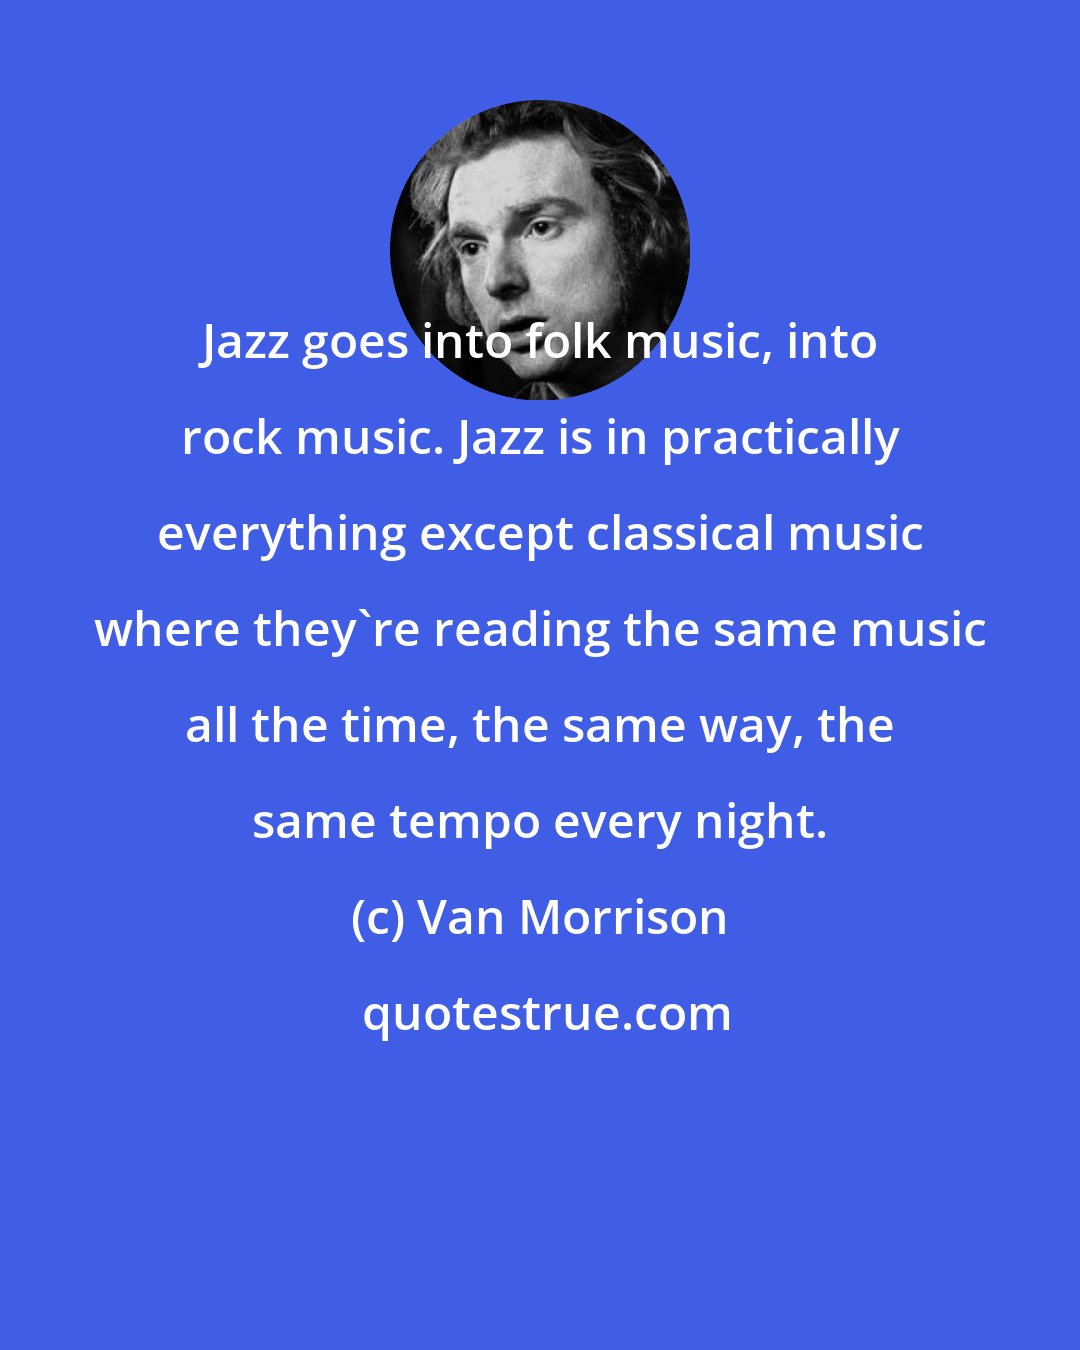 Van Morrison: Jazz goes into folk music, into rock music. Jazz is in practically everything except classical music where they're reading the same music all the time, the same way, the same tempo every night.